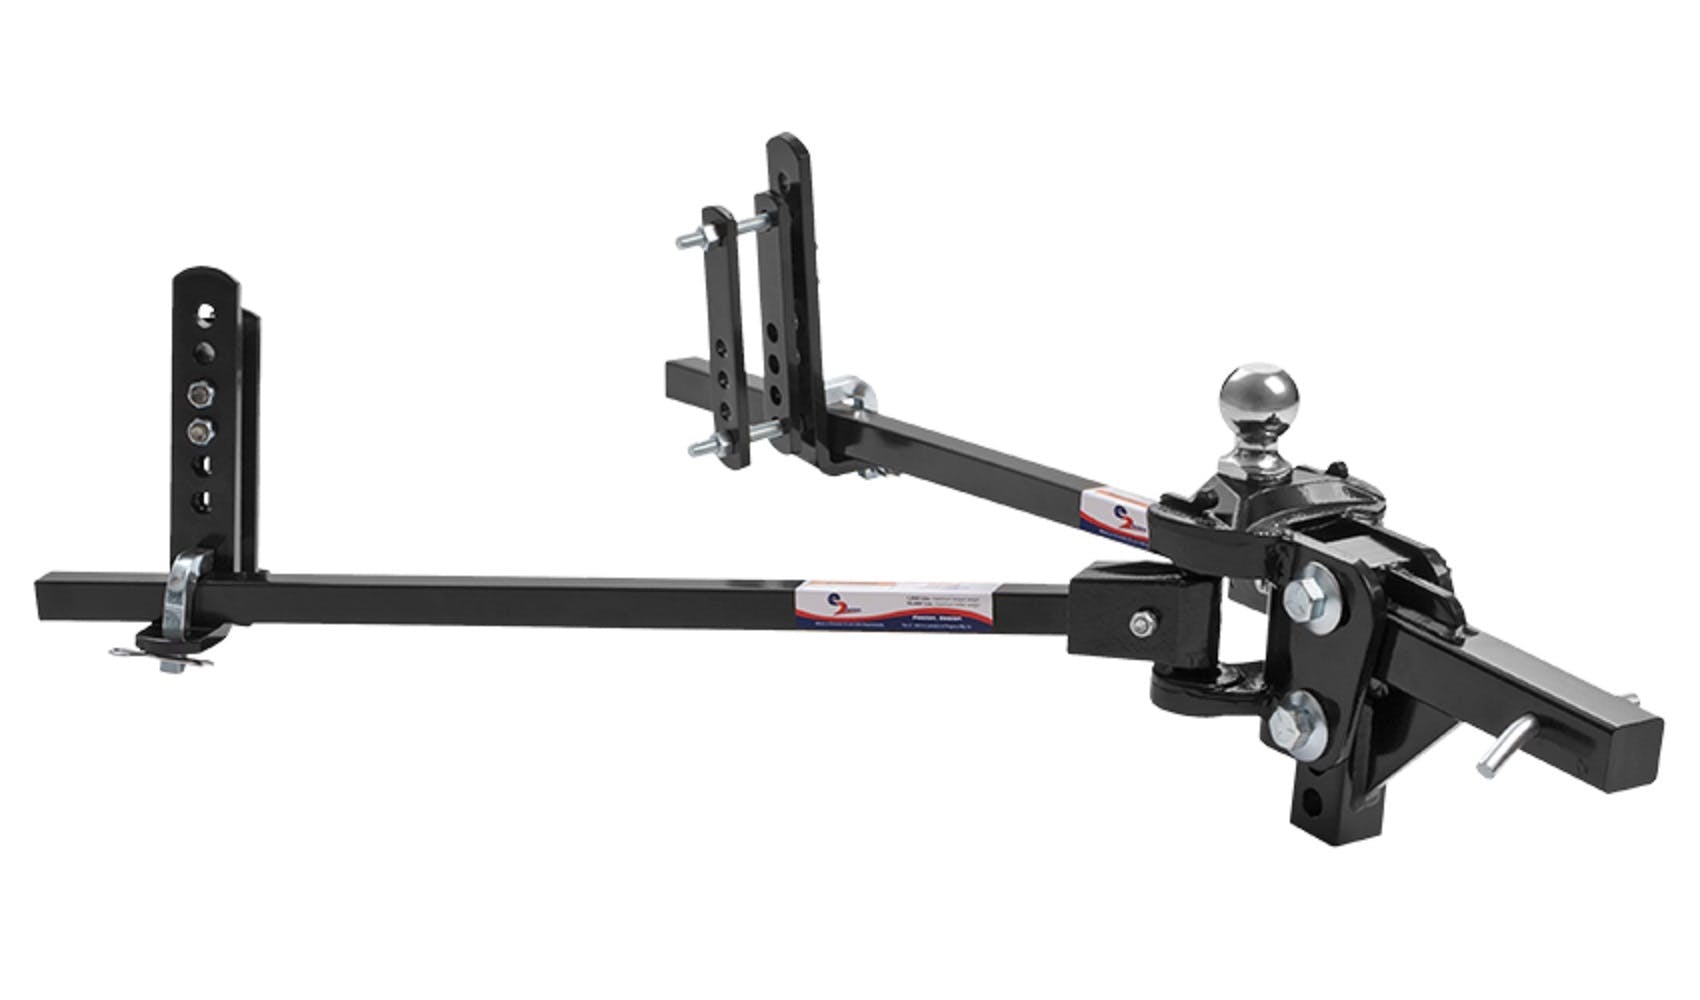 Fastway 92-00-0600 E2 6,000 Lbs Trunion Weight Distributing Hitch